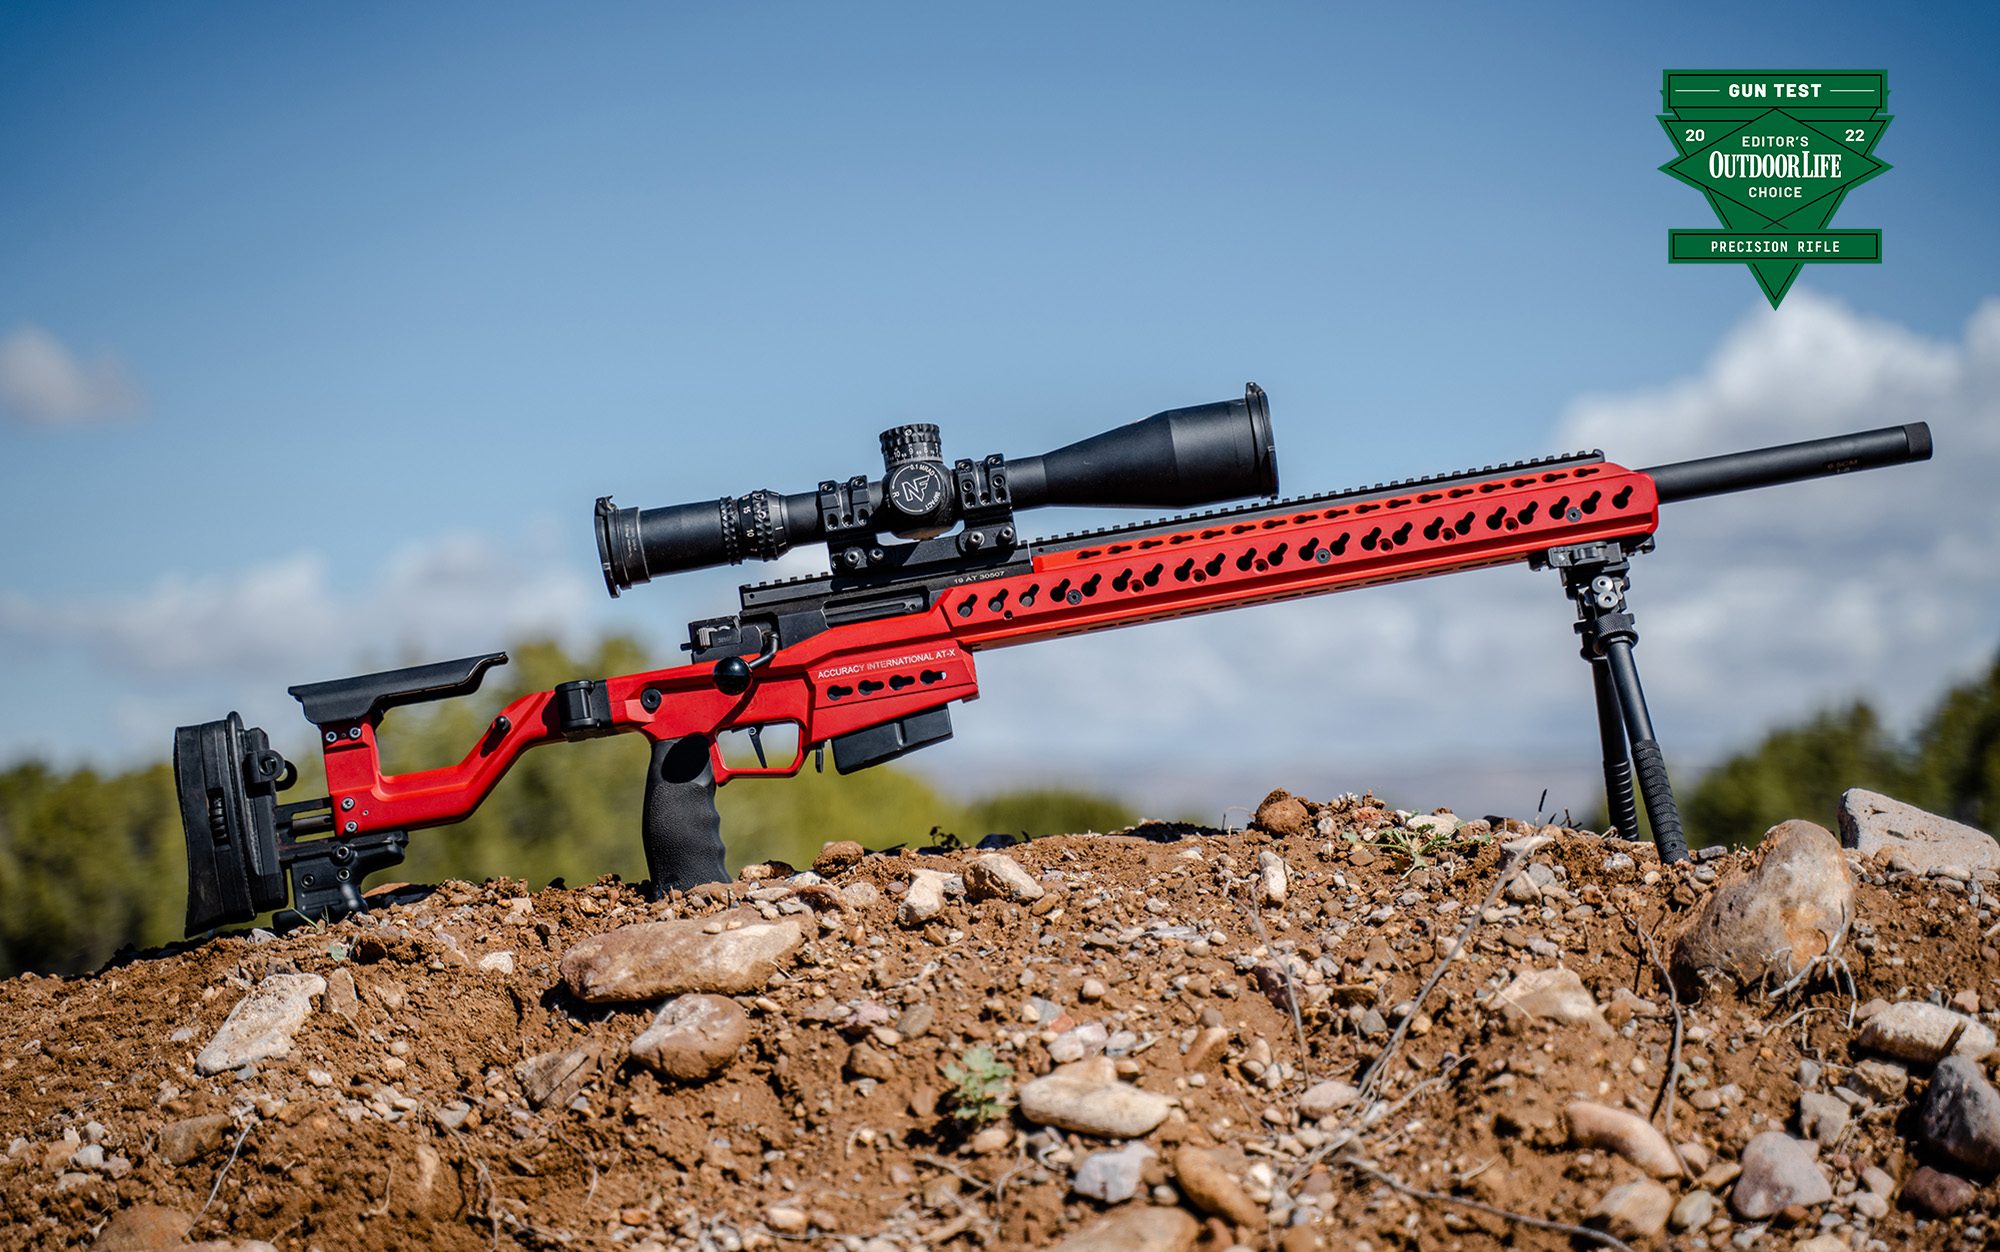 A purpose-built competition rifle.